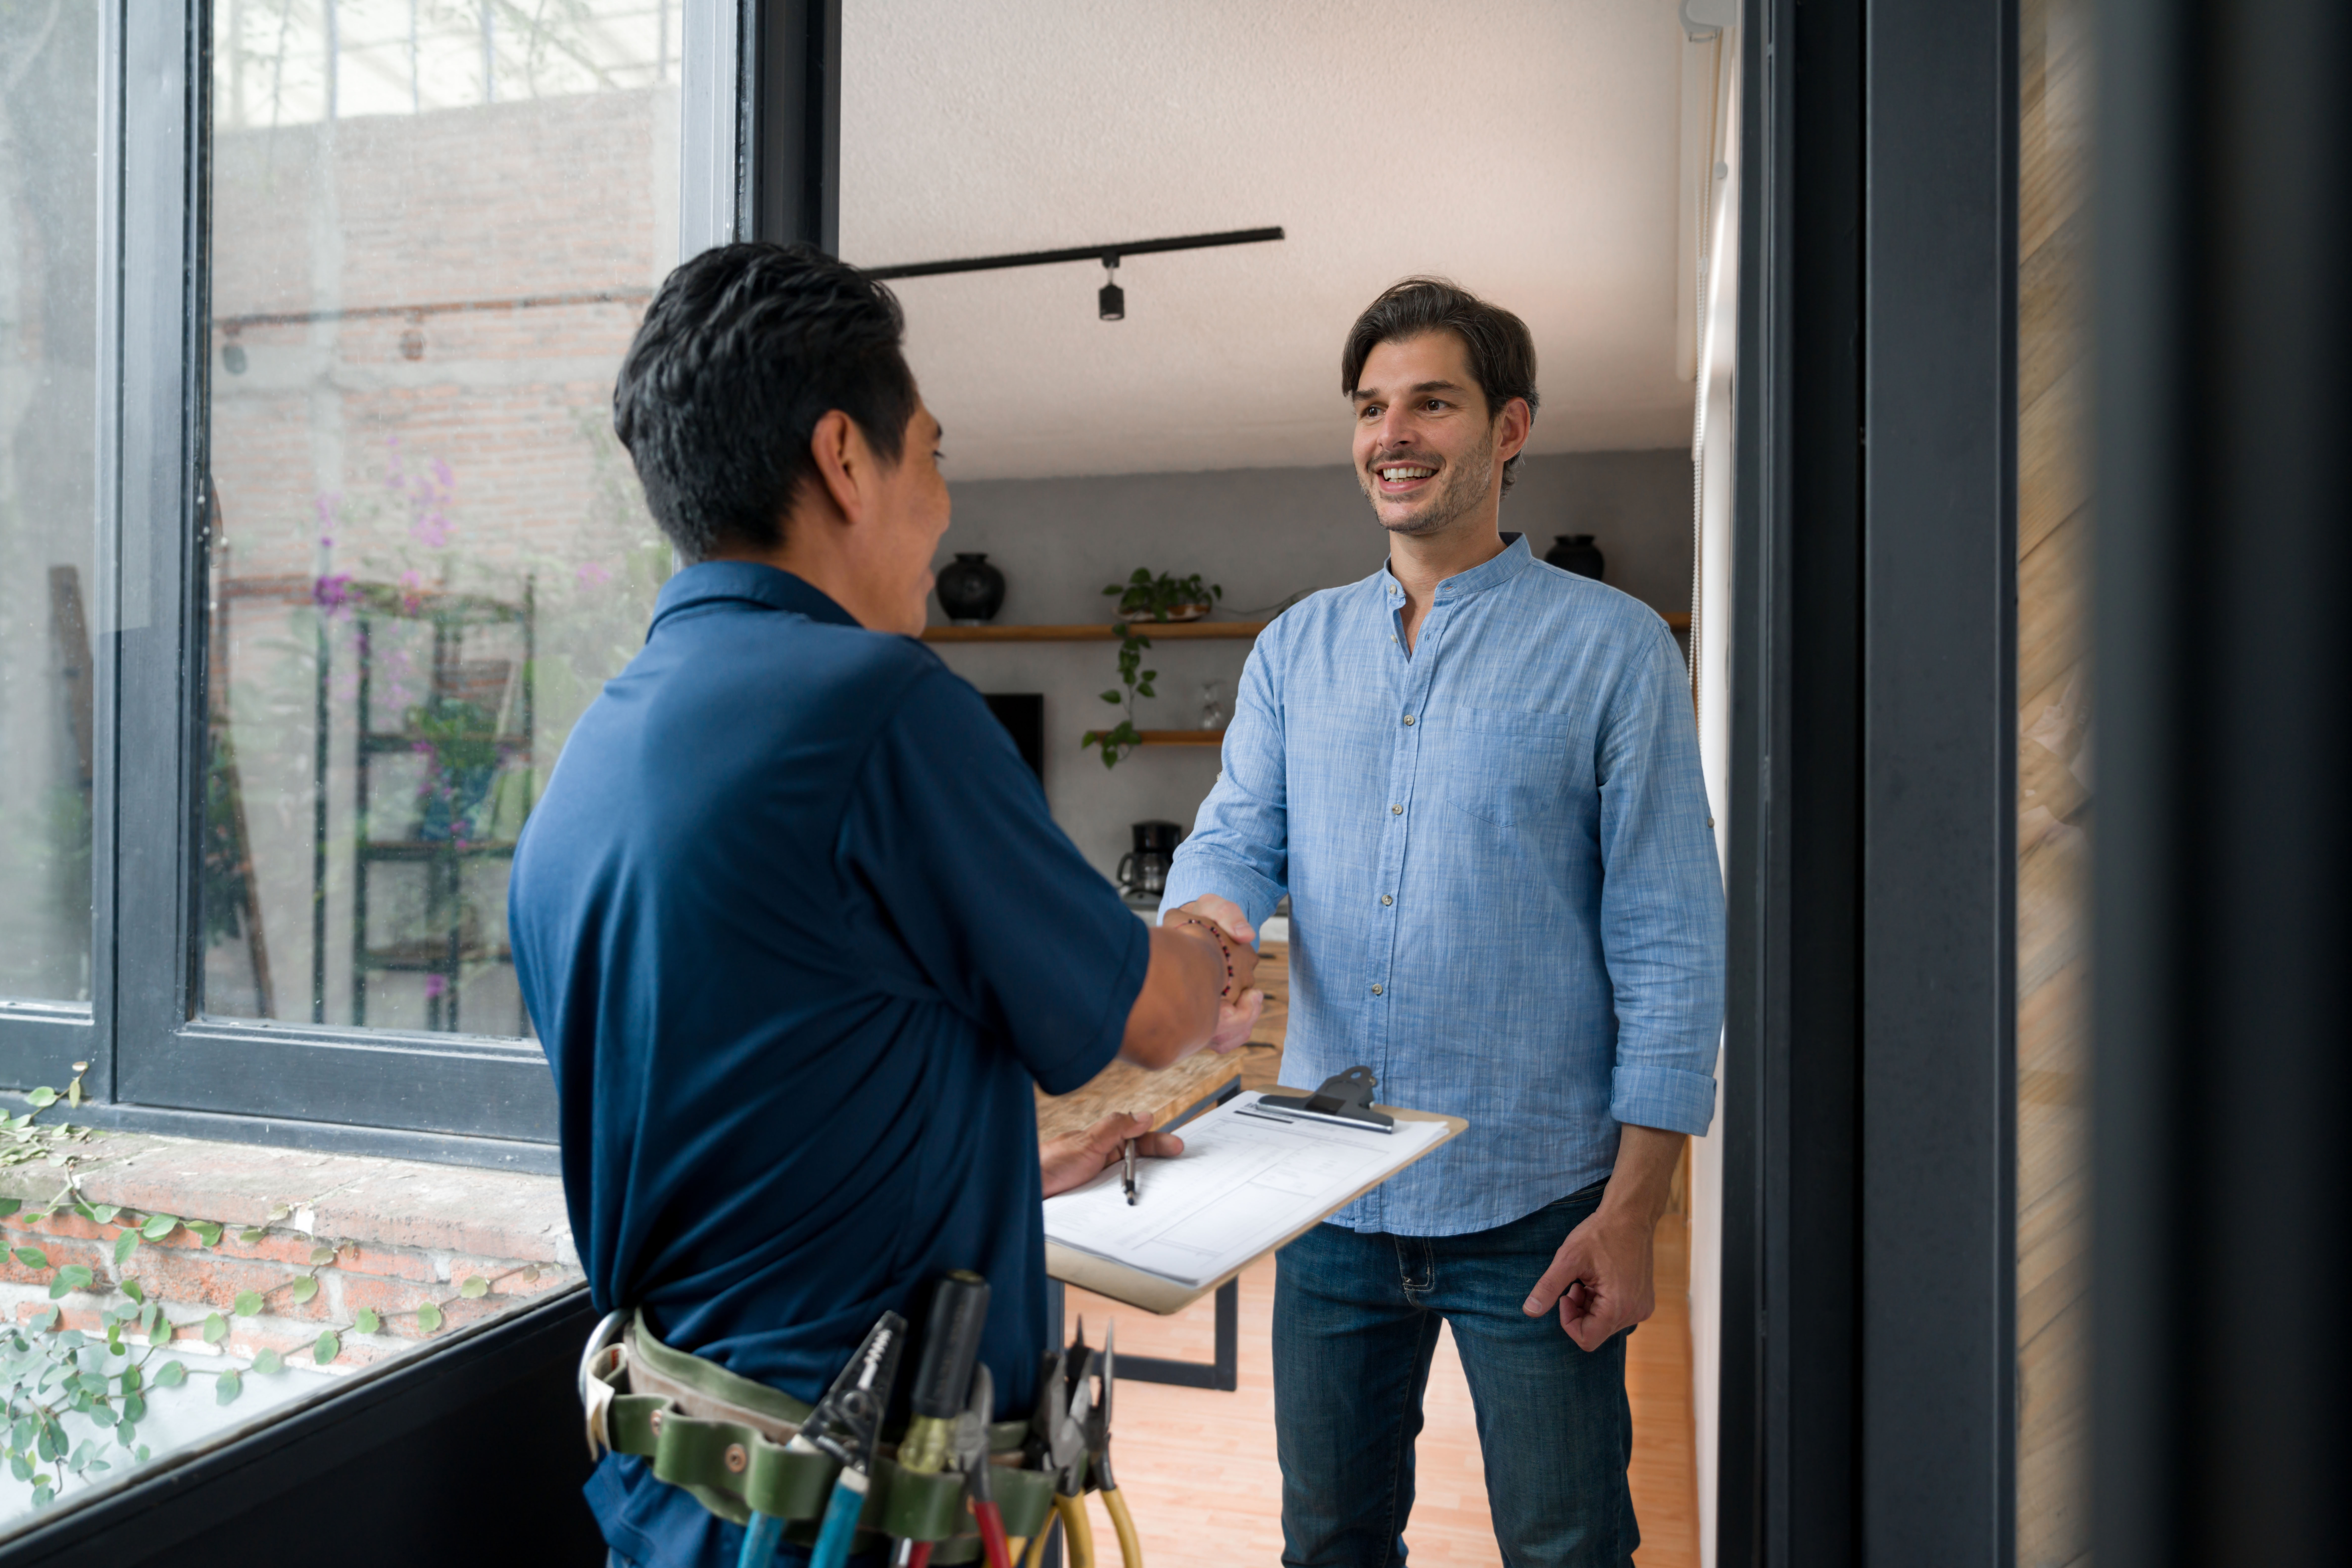 HVAC tech greeting a client with a handshake at the door of his house